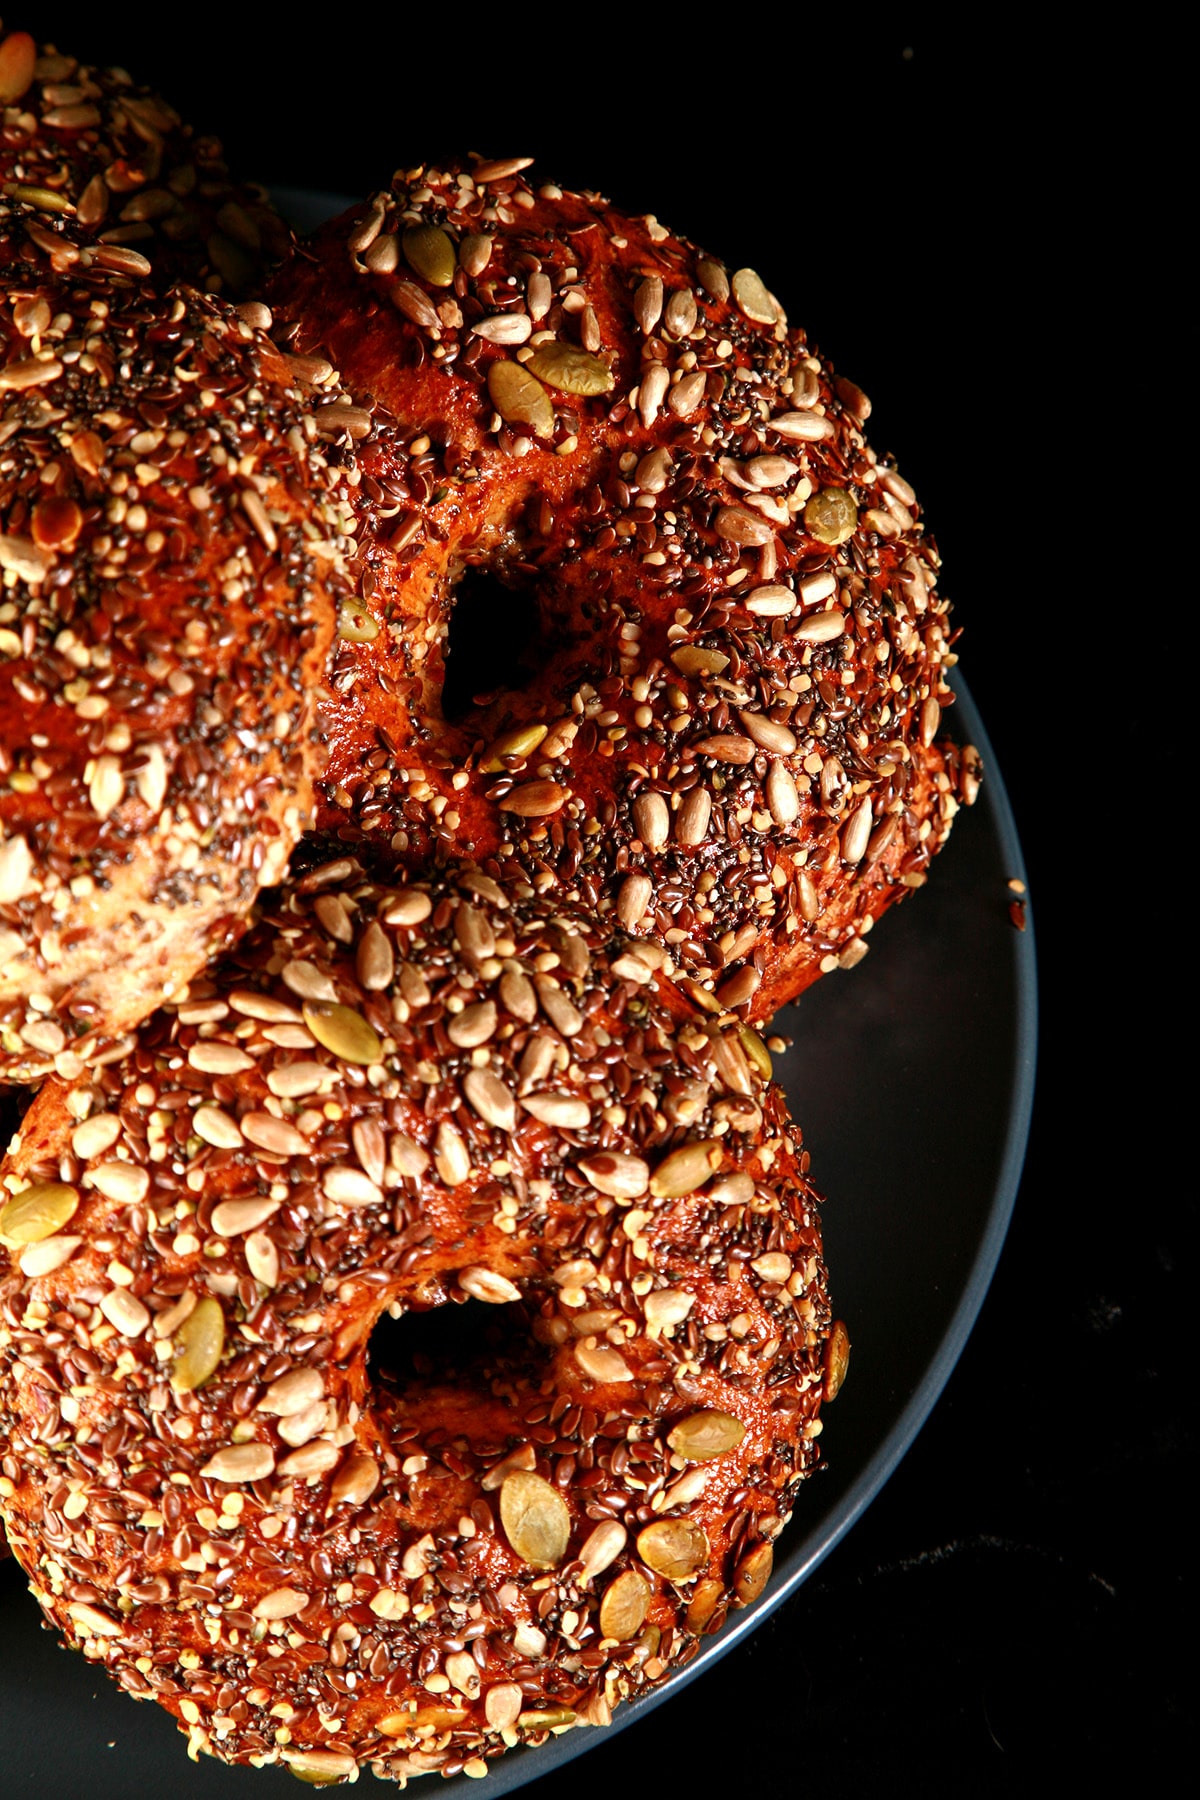 A plate stacked with a pile of whole wheat and flax bagels. The top side of each bagel is covered in a mix of seeds - pumpkin, sunflower, flax, sesame, chia, and poppy.